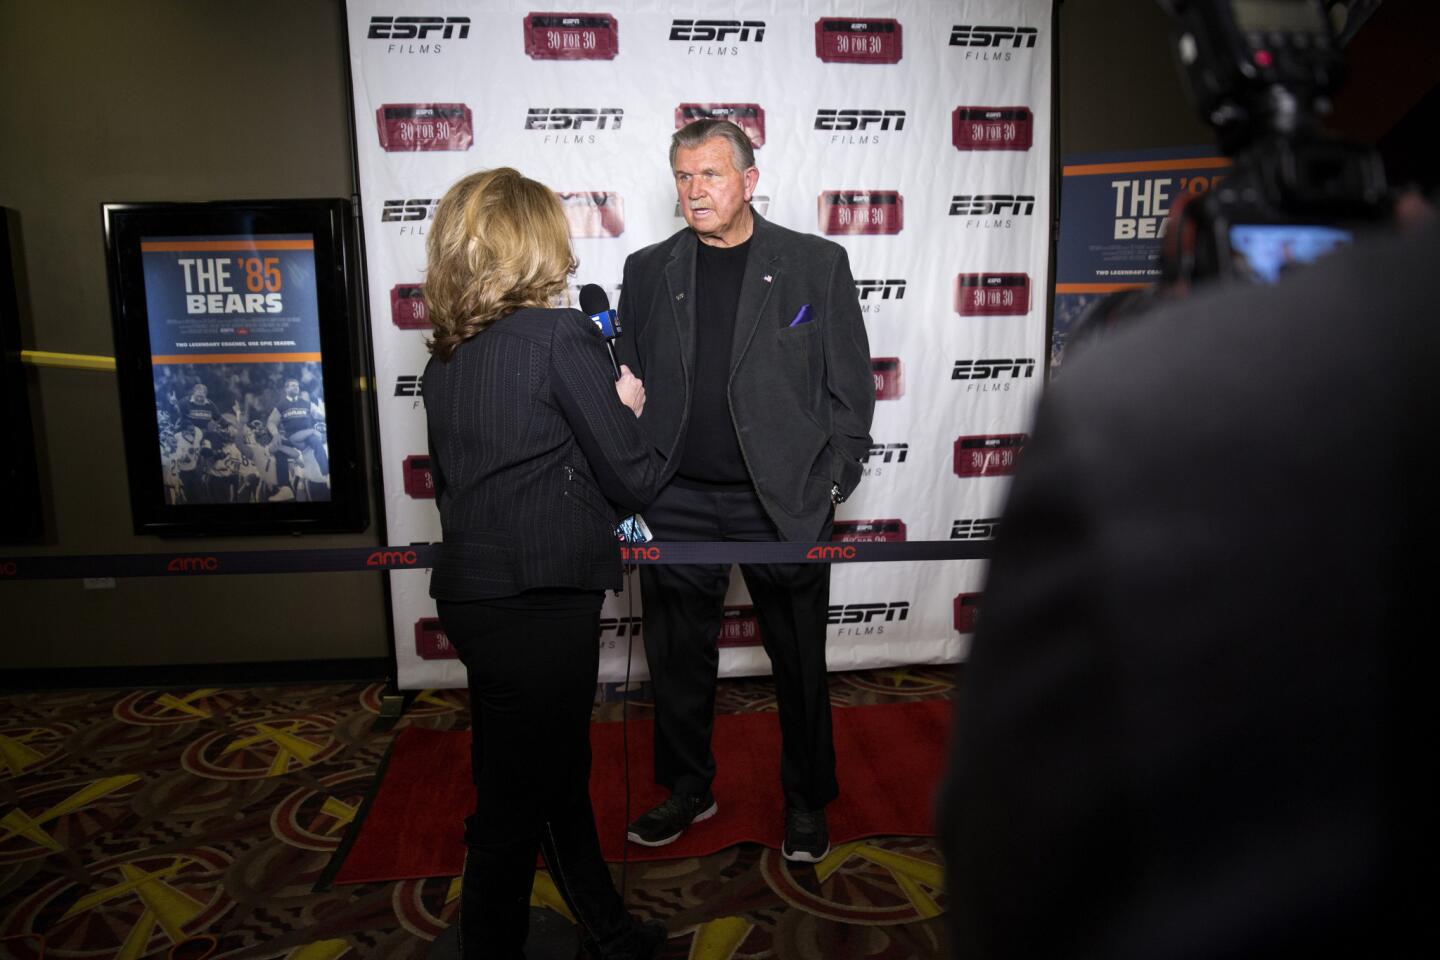 Former Chicago Bears coach Mike Ditka speaks to media at an advance screening of "The '85 Bears" documentary.